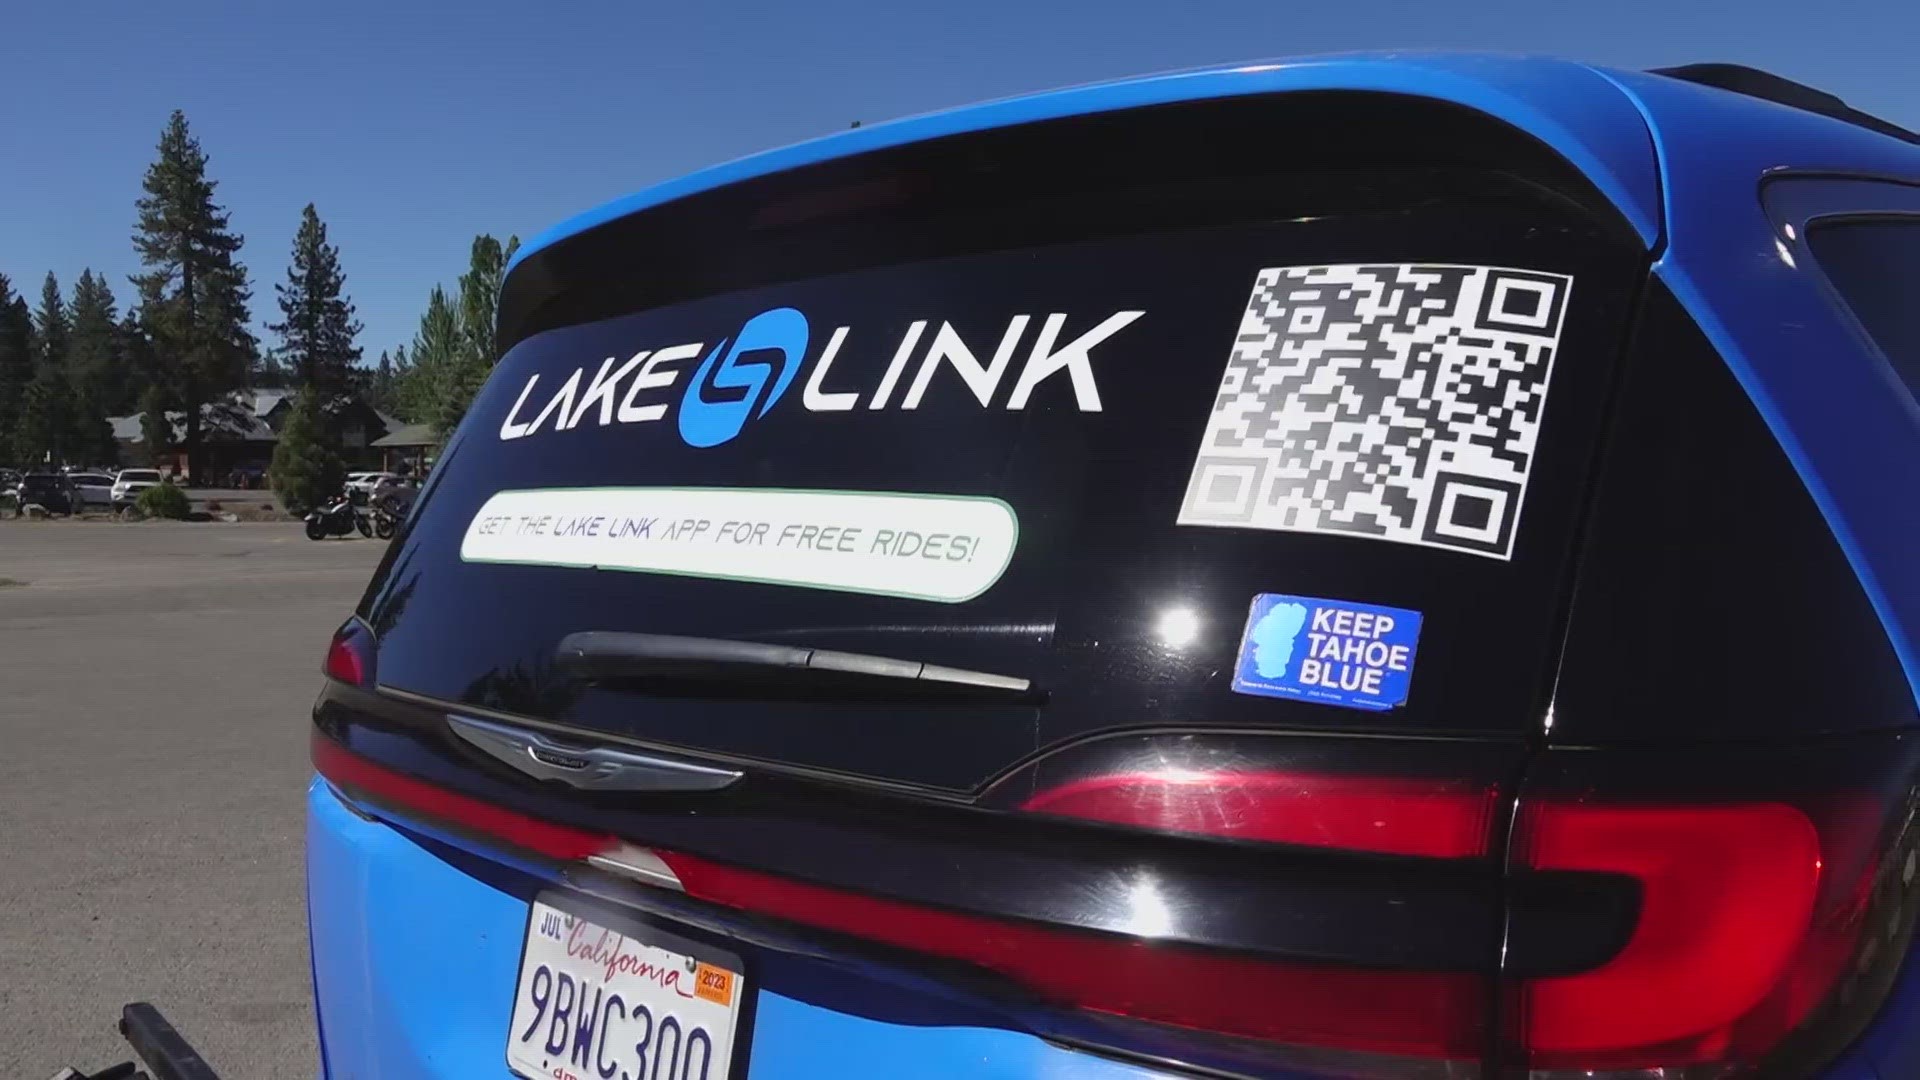 People can use Lake Link, a micro-transit shuttle system, to get a free ride in parts of South Lake Tahoe.